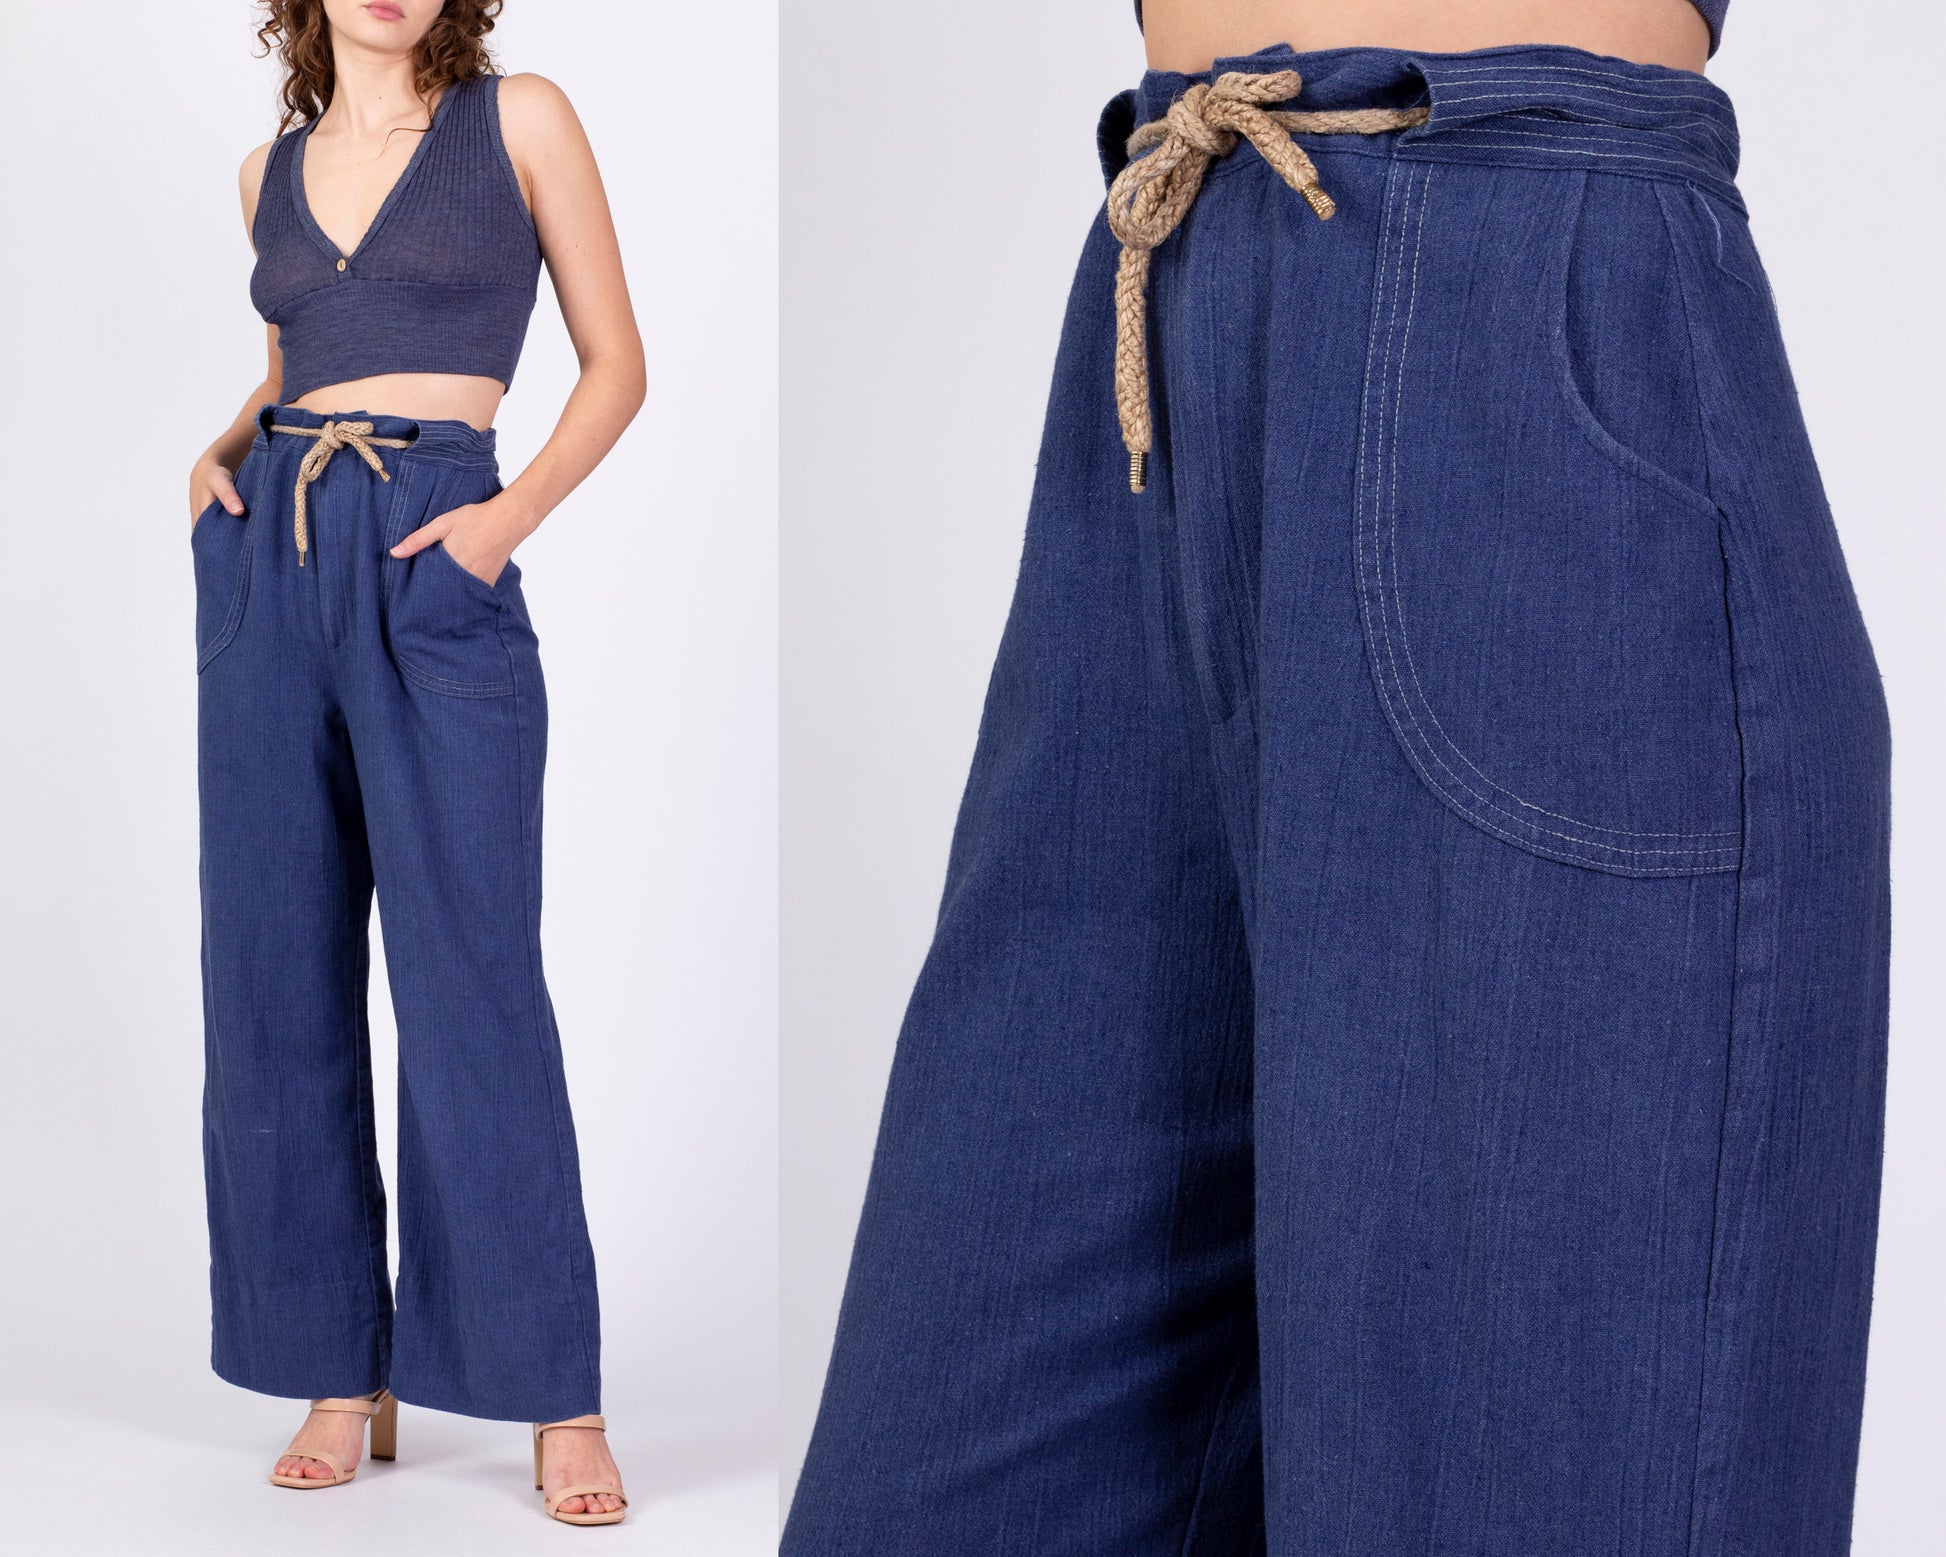 70s Straight Leg Chambray Trousers - Large, 30.5" 